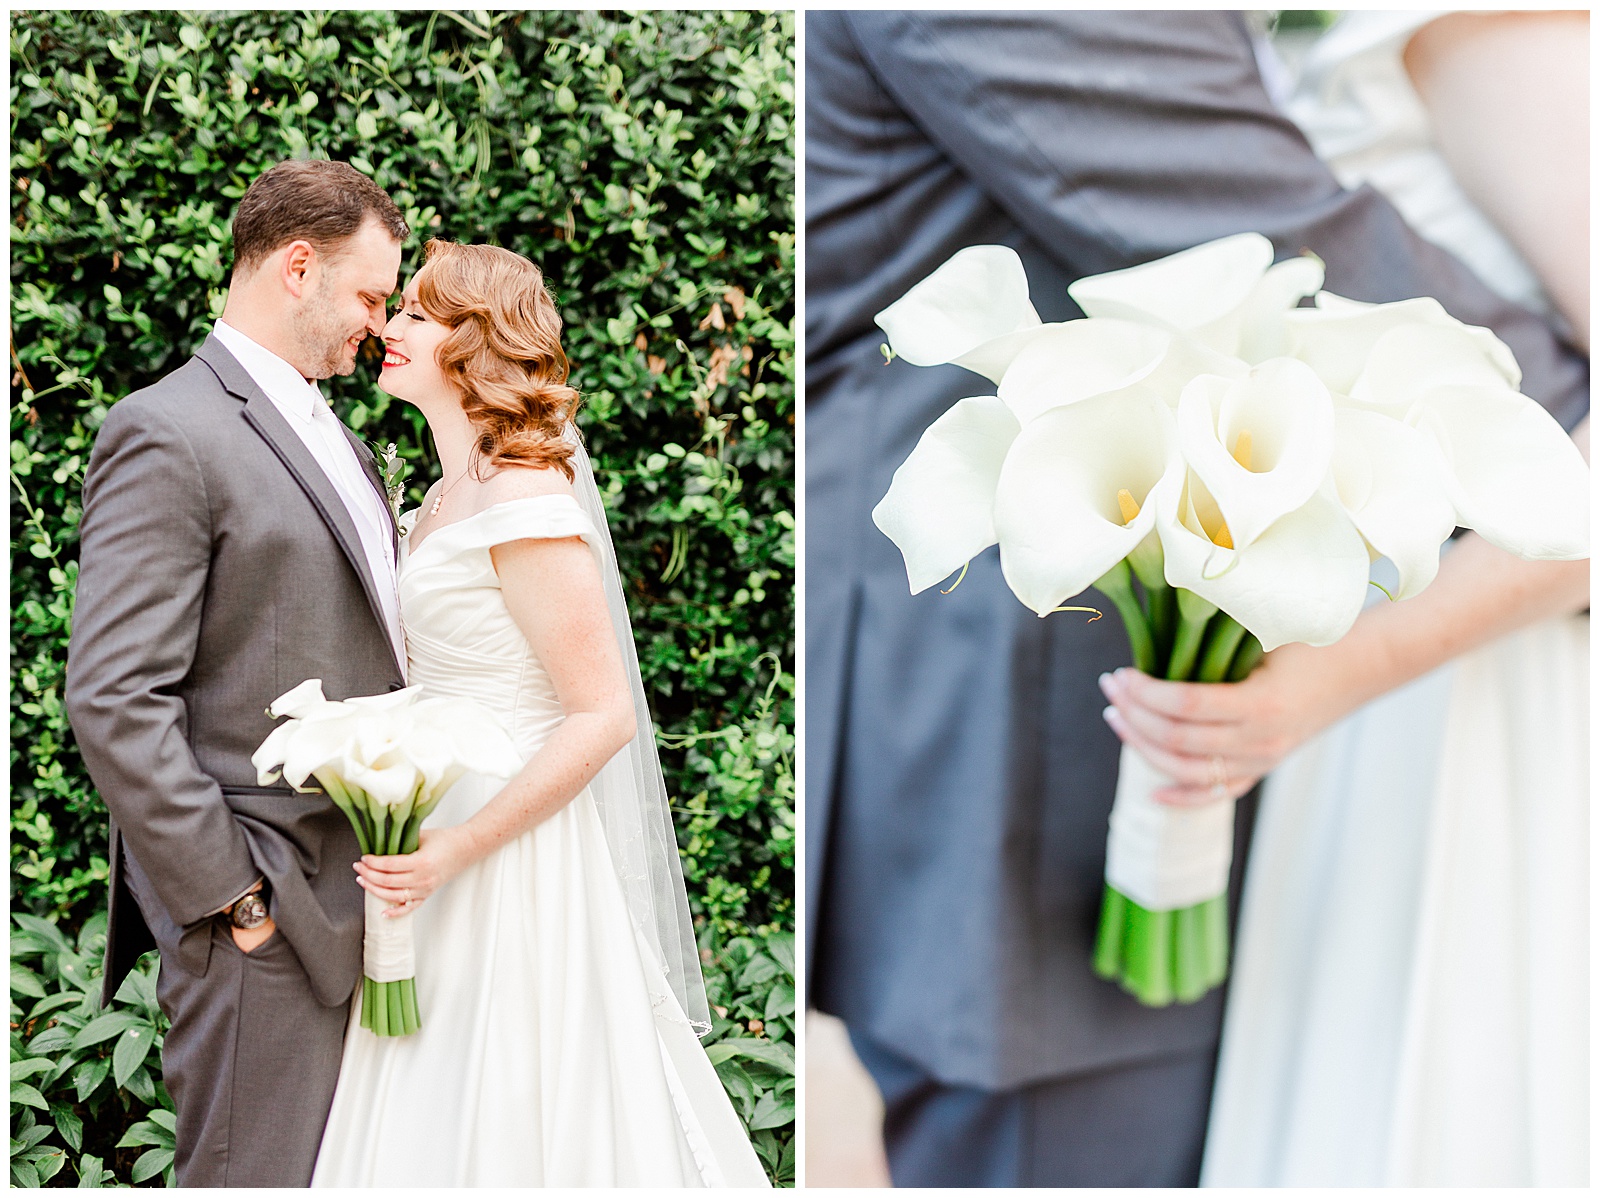 Lily Bouquet with Elegant Red-Haired Bride and groom in Gorgeous 1940s Modern Vintage Wedding in Charlotte, NC | check out the full wedding at KevynDixonPhoto.com